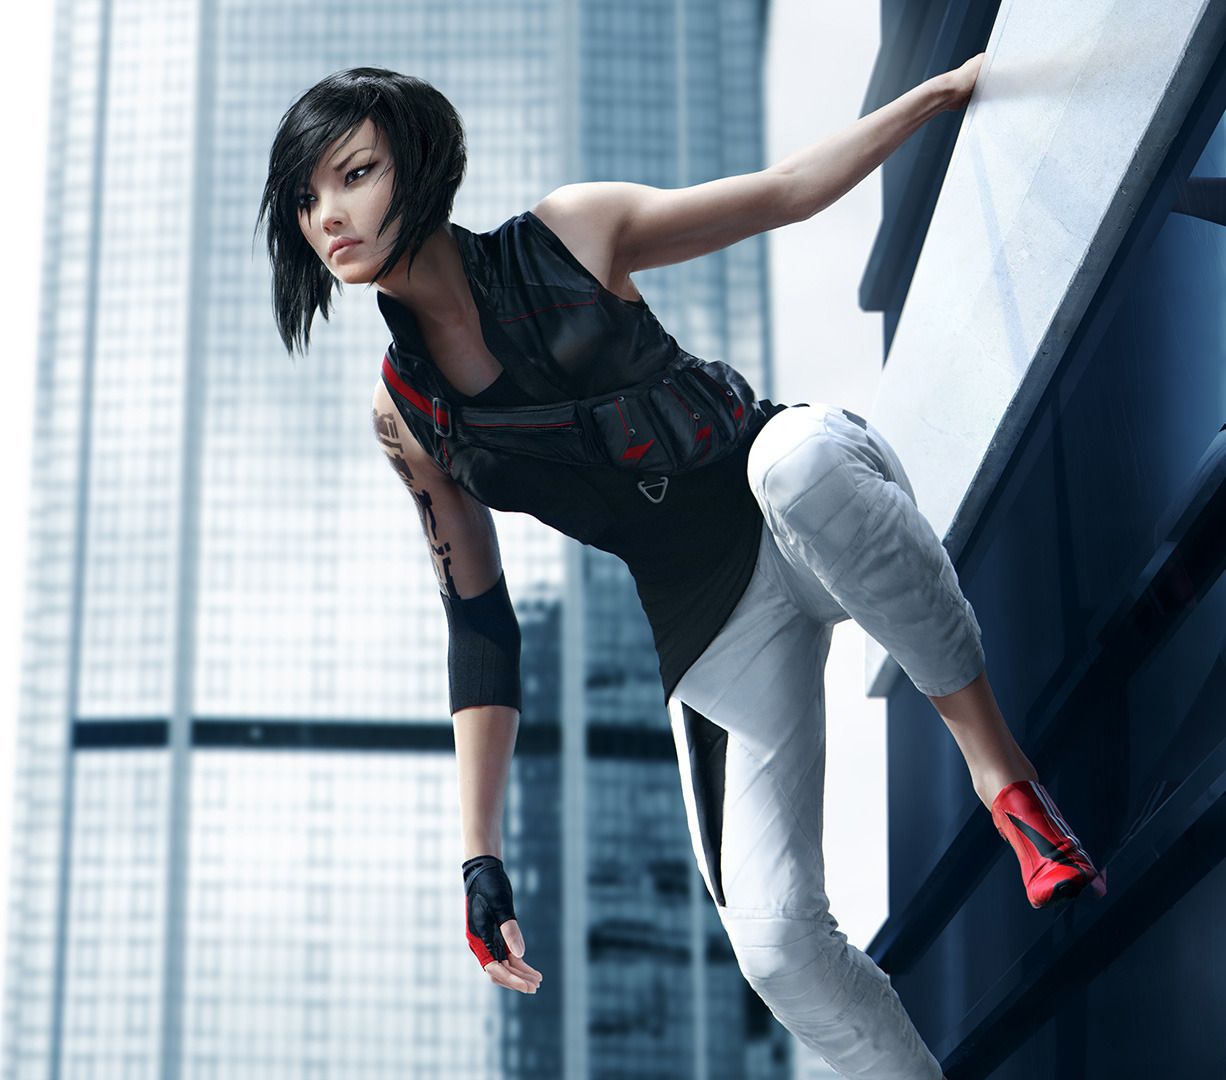 gamefreaksnz:  DICE confirms Mirror’s Edge reboot, new trailer  The new Mirror’s